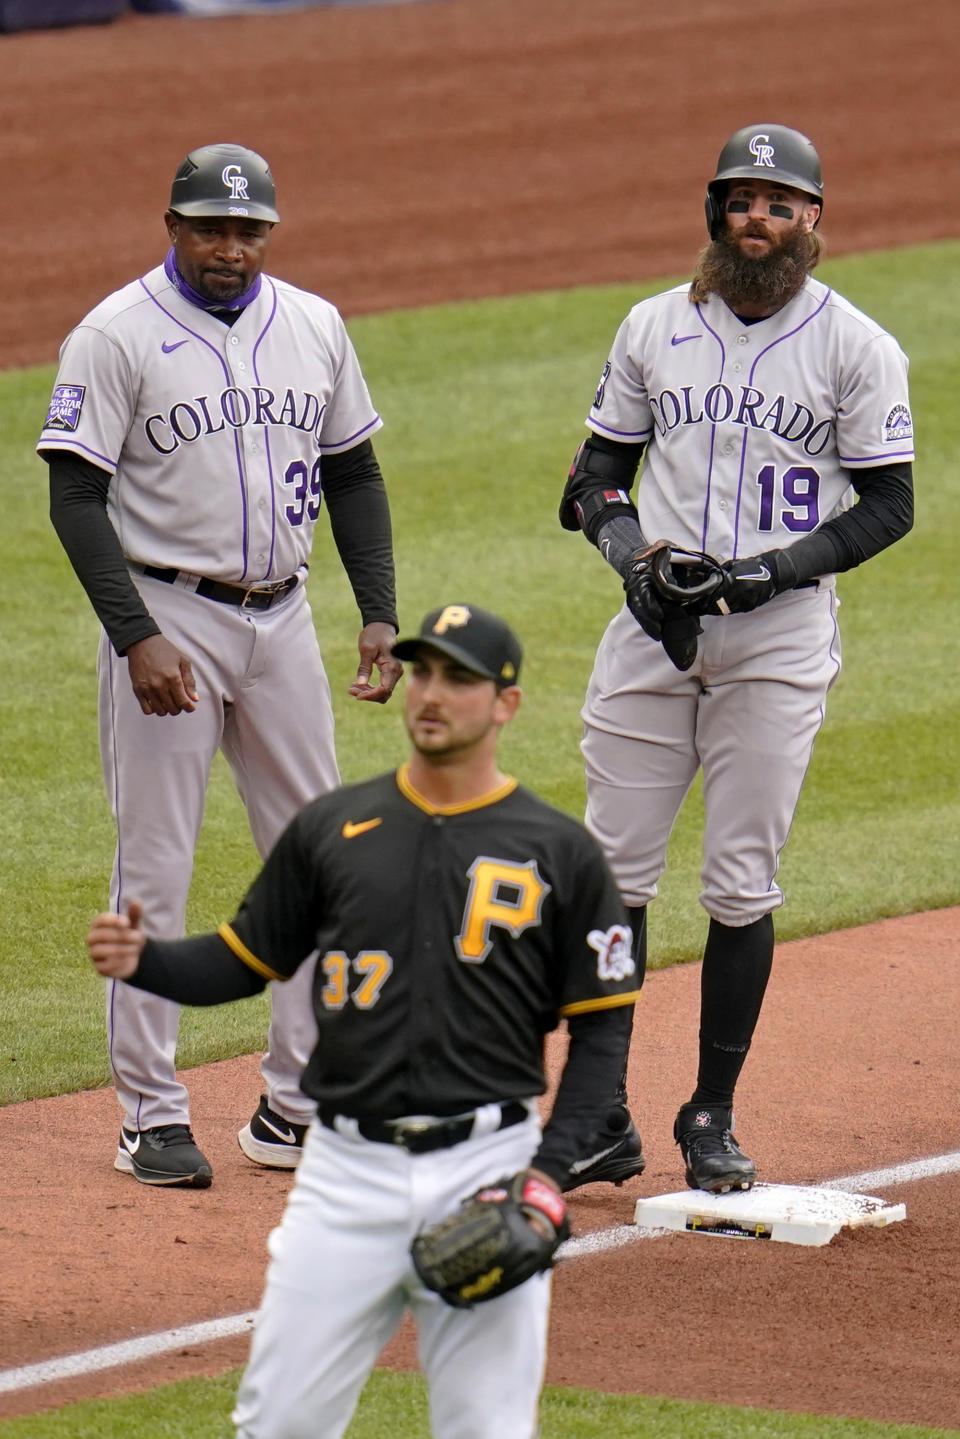 Colorado Rockies' Charlie Blackmon (19) stand next to third base coach Stu Cole (39) on third after hitting a triple off Pittsburgh Pirates starting pitcher Chase De Jong (37), driving in a run, during the fourth inning of a baseball game in Pittsburgh, Sunday, May 30, 2021. (AP Photo/Gene J. Puskar)